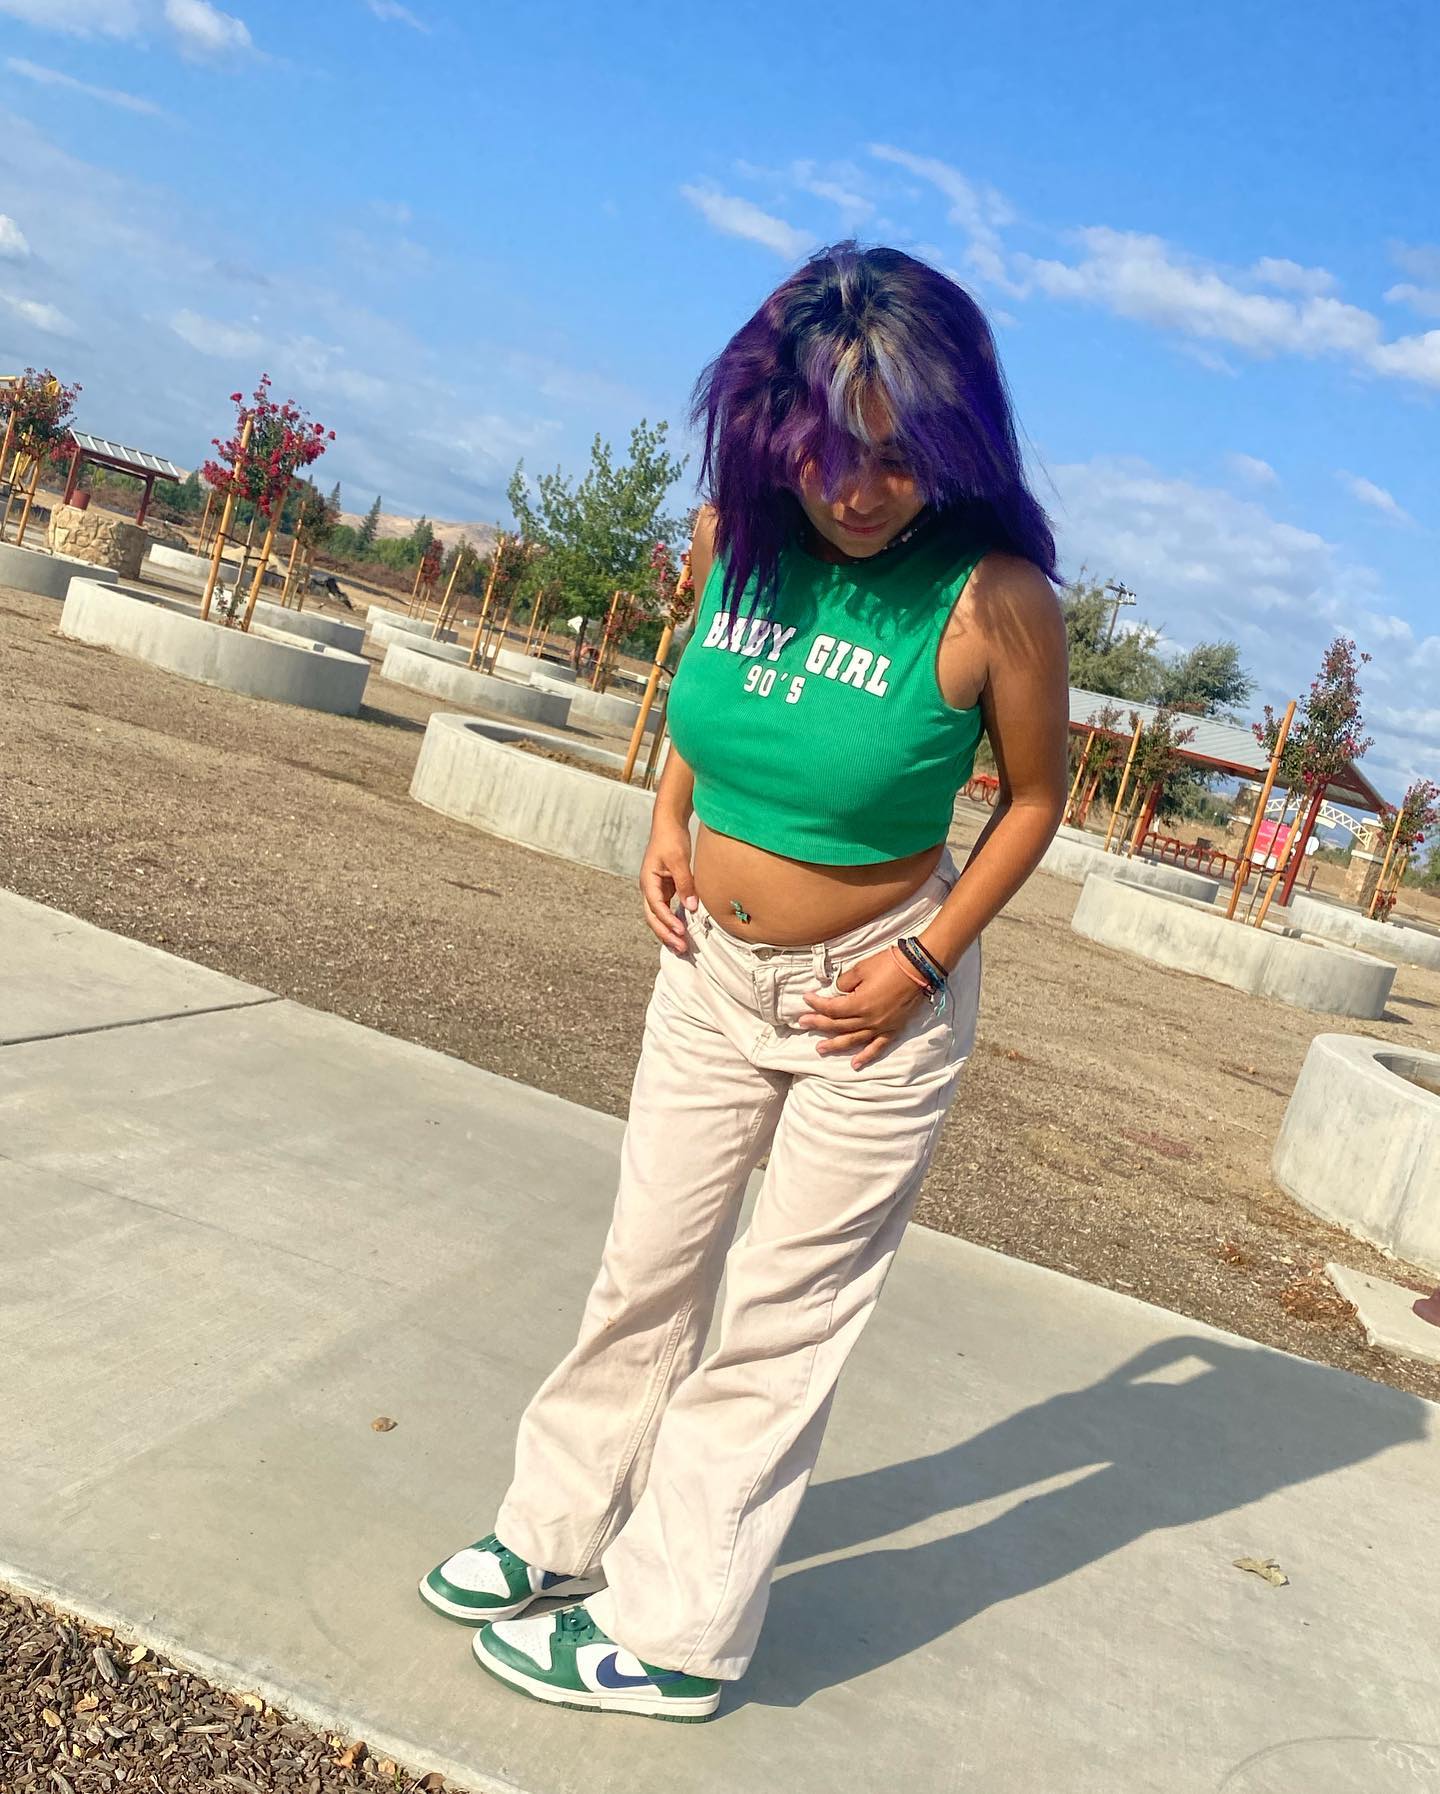 “Now she want photo you already know, though you only live once that’s the motto Nigga yolo” - Drake 🪄🎚️ 

#purplehair #fyp #sheingals #smallbusinesssupport #likesforlike #hatersgonnahate #beyourself #pictureoftheday